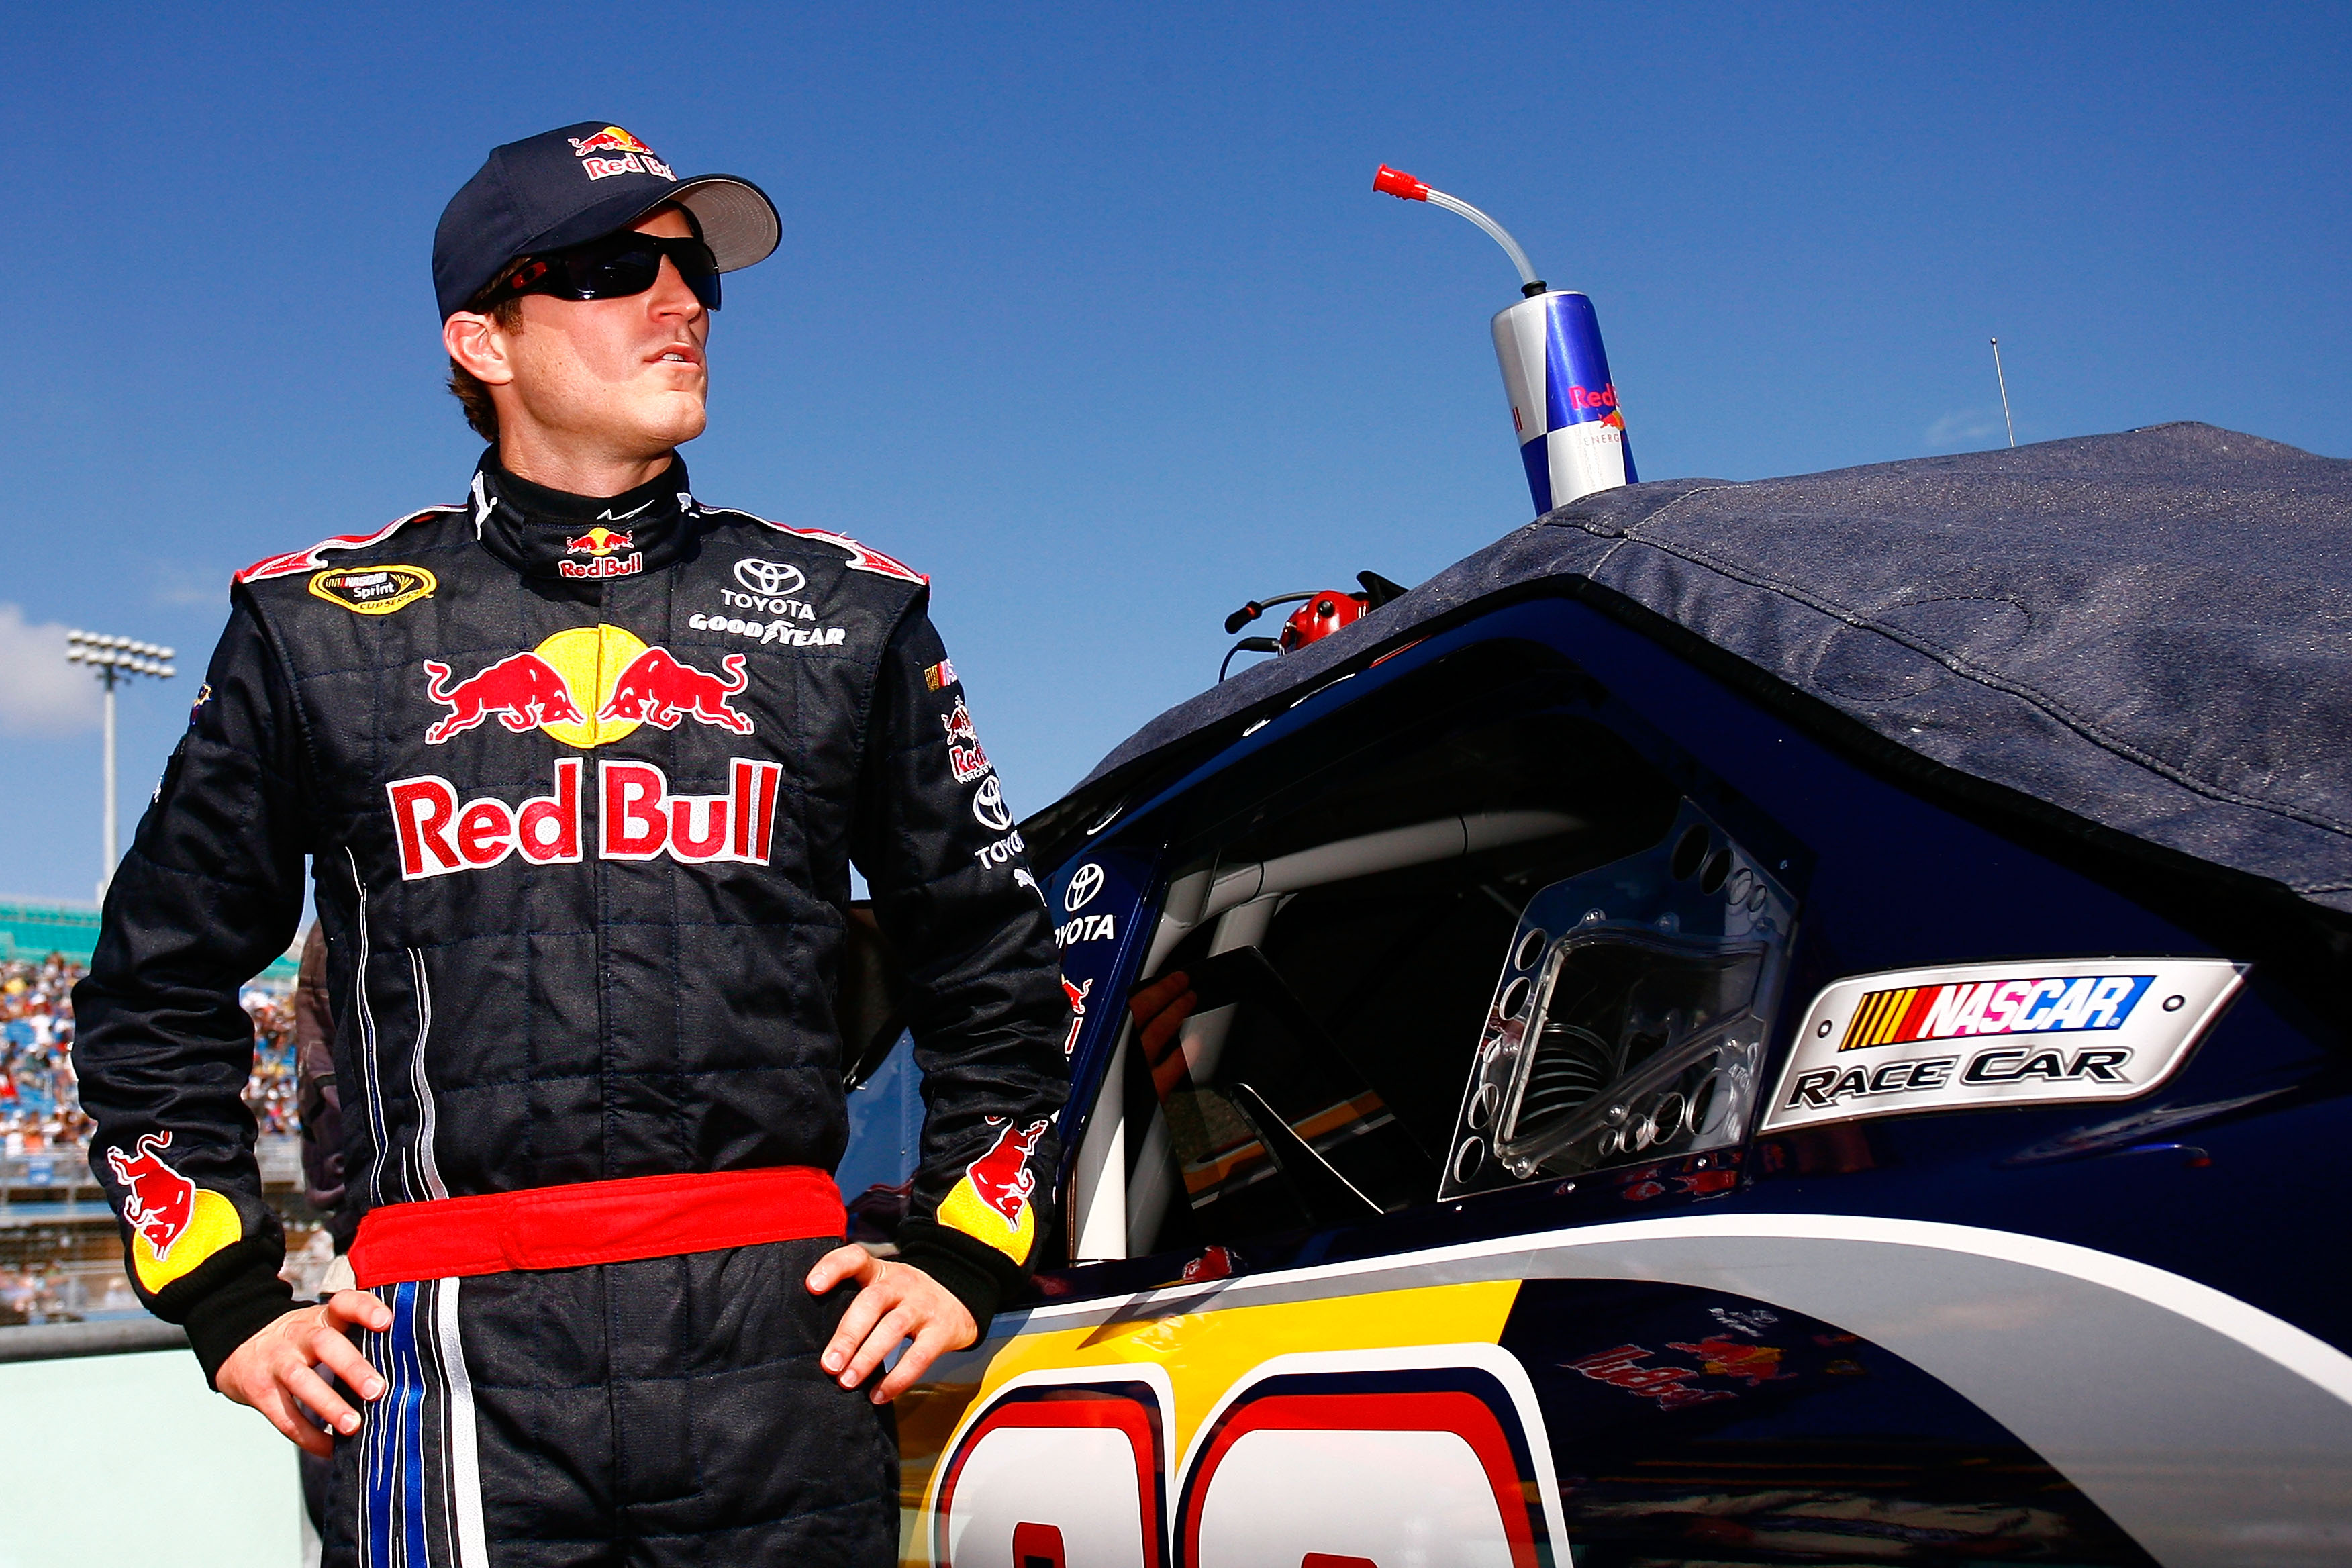 HOMESTEAD, FL - NOVEMBER 21:  Kasey Kahne, driver of the #83 Red Bull Toyota, stands by his car prior to the NASCAR Sprint Cup Series Ford 400 at Homestead-Miami Speedway on November 21, 2010 in Homestead, Florida.  (Photo by Jason Smith/Getty Images for